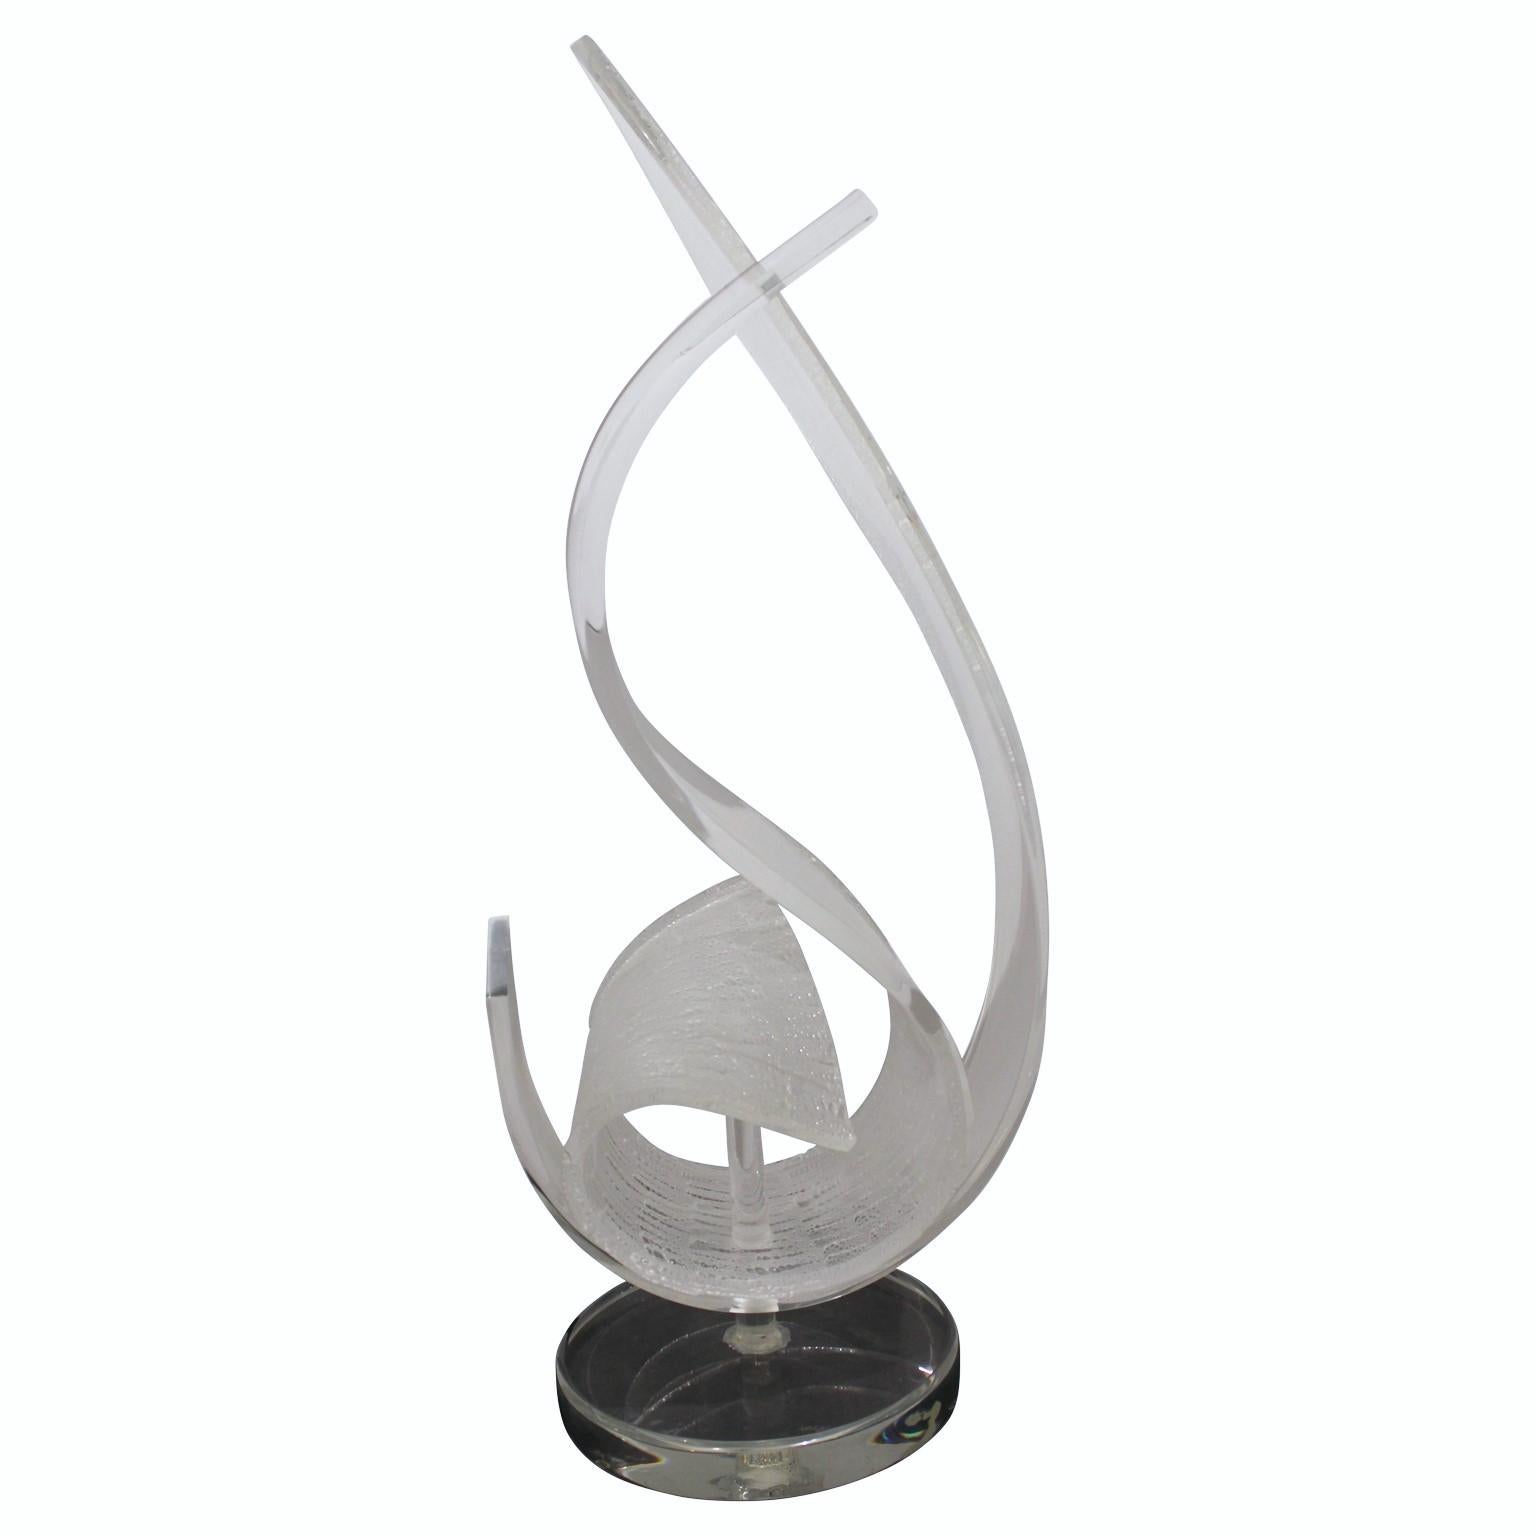 Acrylic Lucite Organic Flowing Sculpture - Gray Abstract Sculpture by Hivo Van Teal